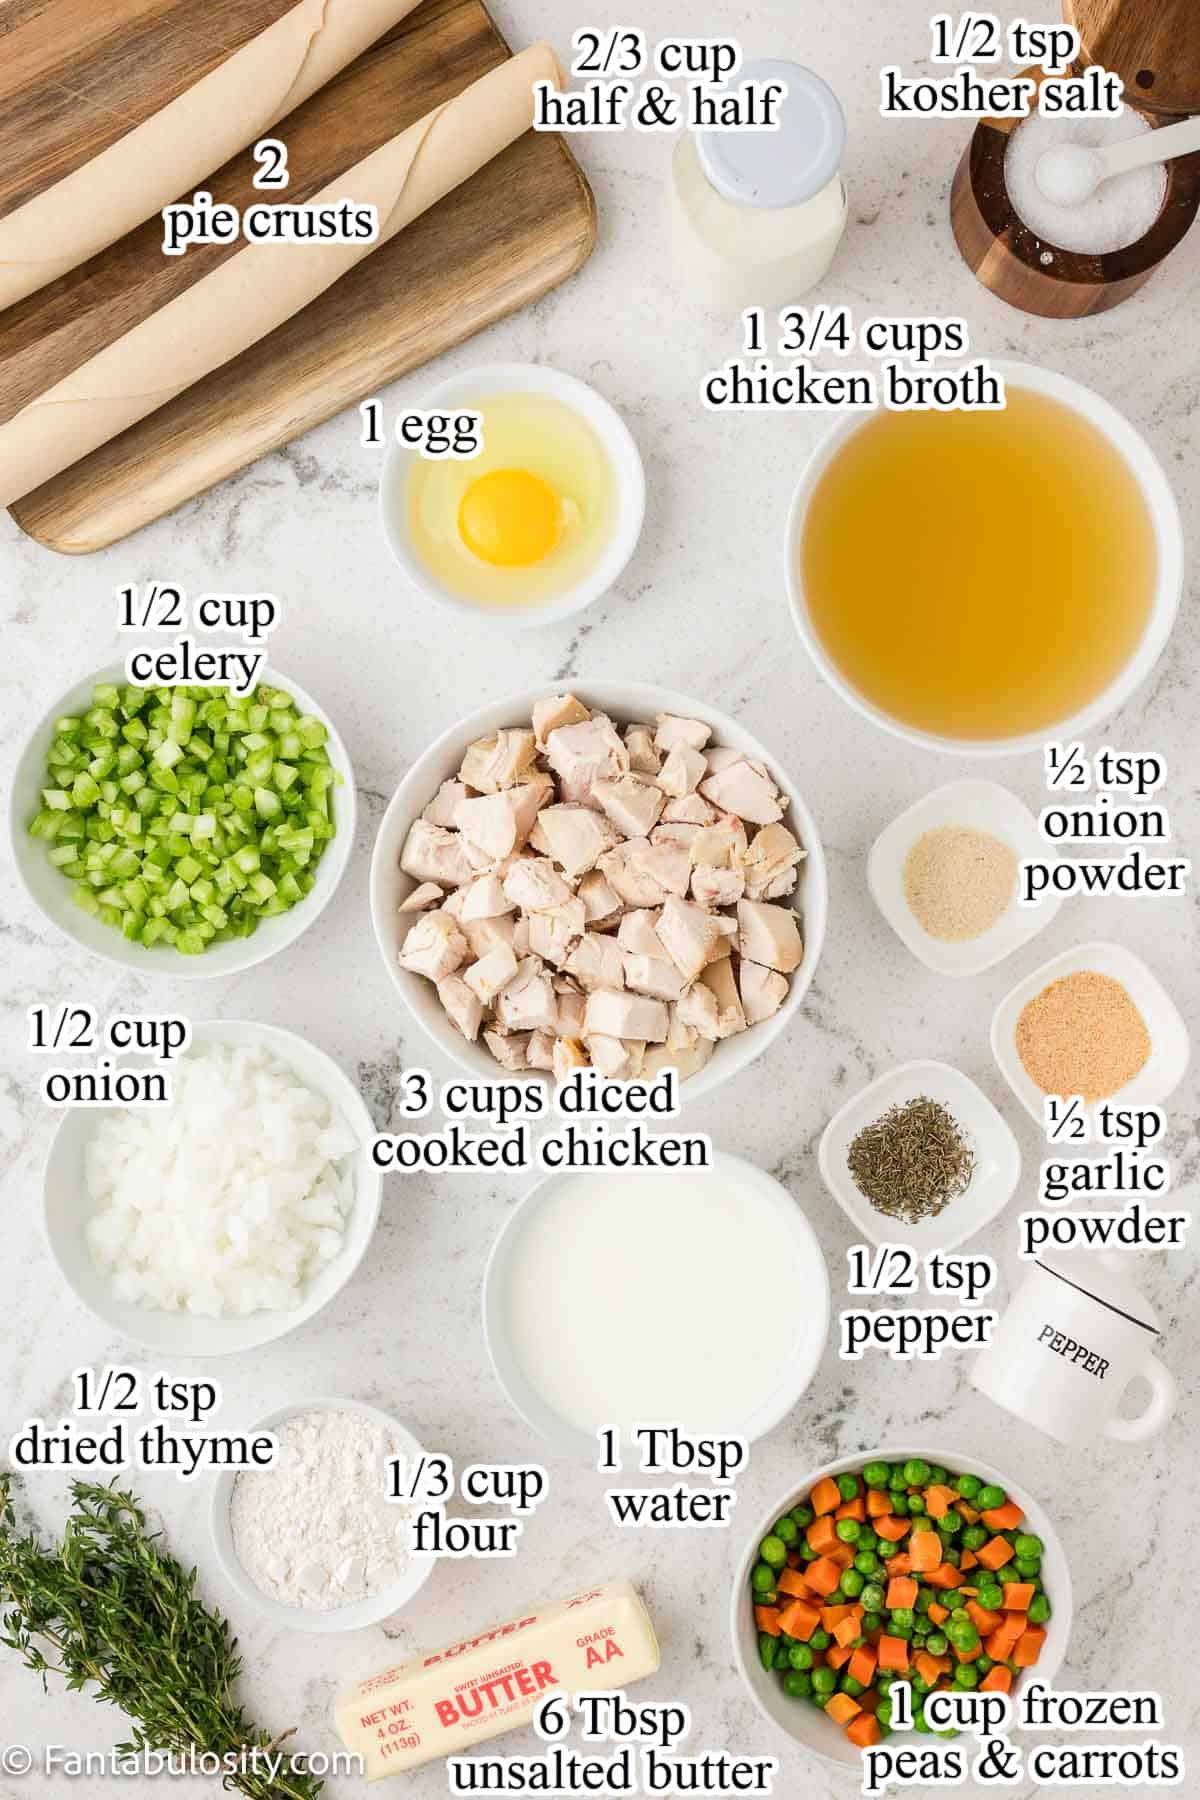 Labeled ingredients for chicken pot pie recipe.